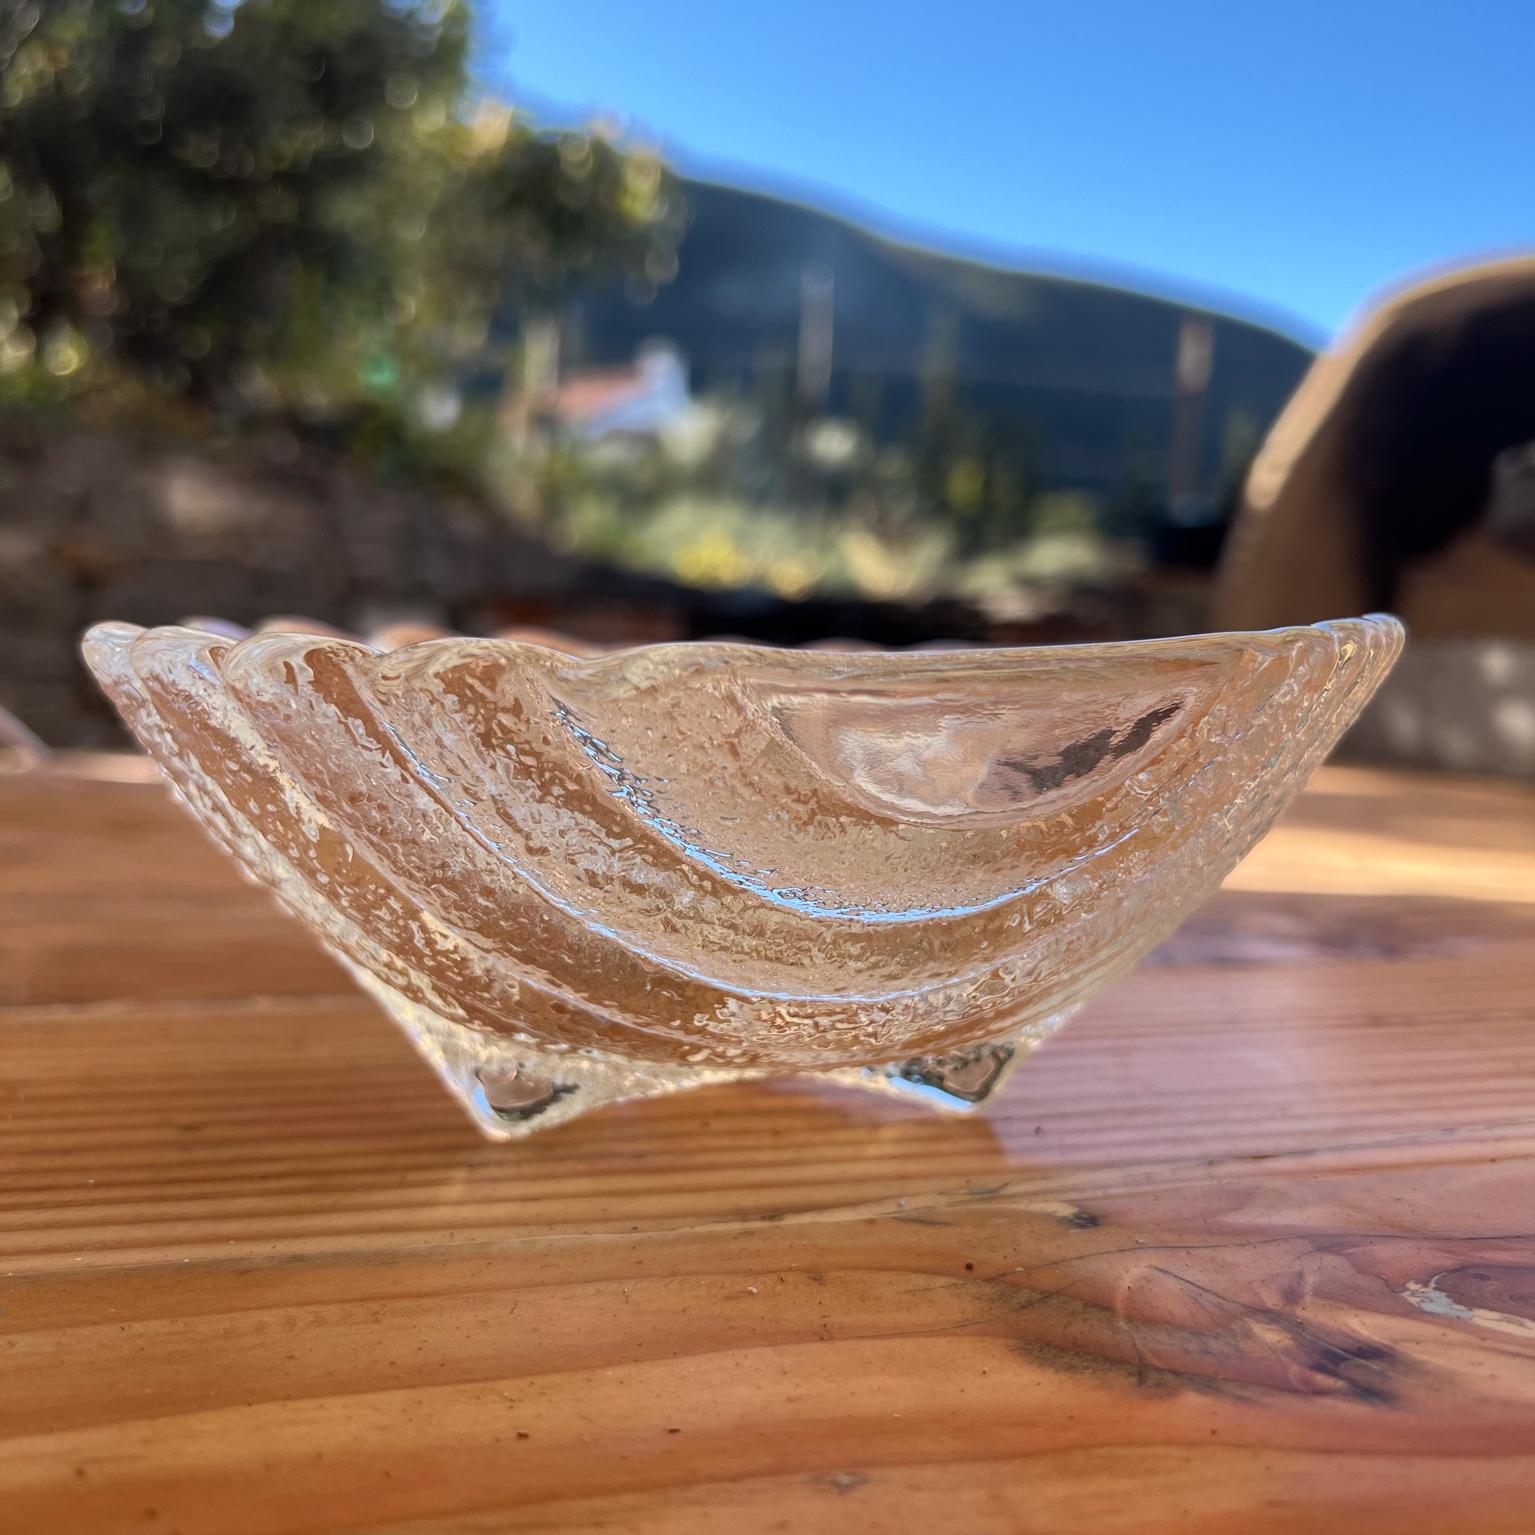 Vintage Sculptural Glass Shell Dish footed.
In the style of Blenko Glass Company.
No label
6.75 w x 6.88 d x 2.68 h
Preowned original vintage condition
See all images please.